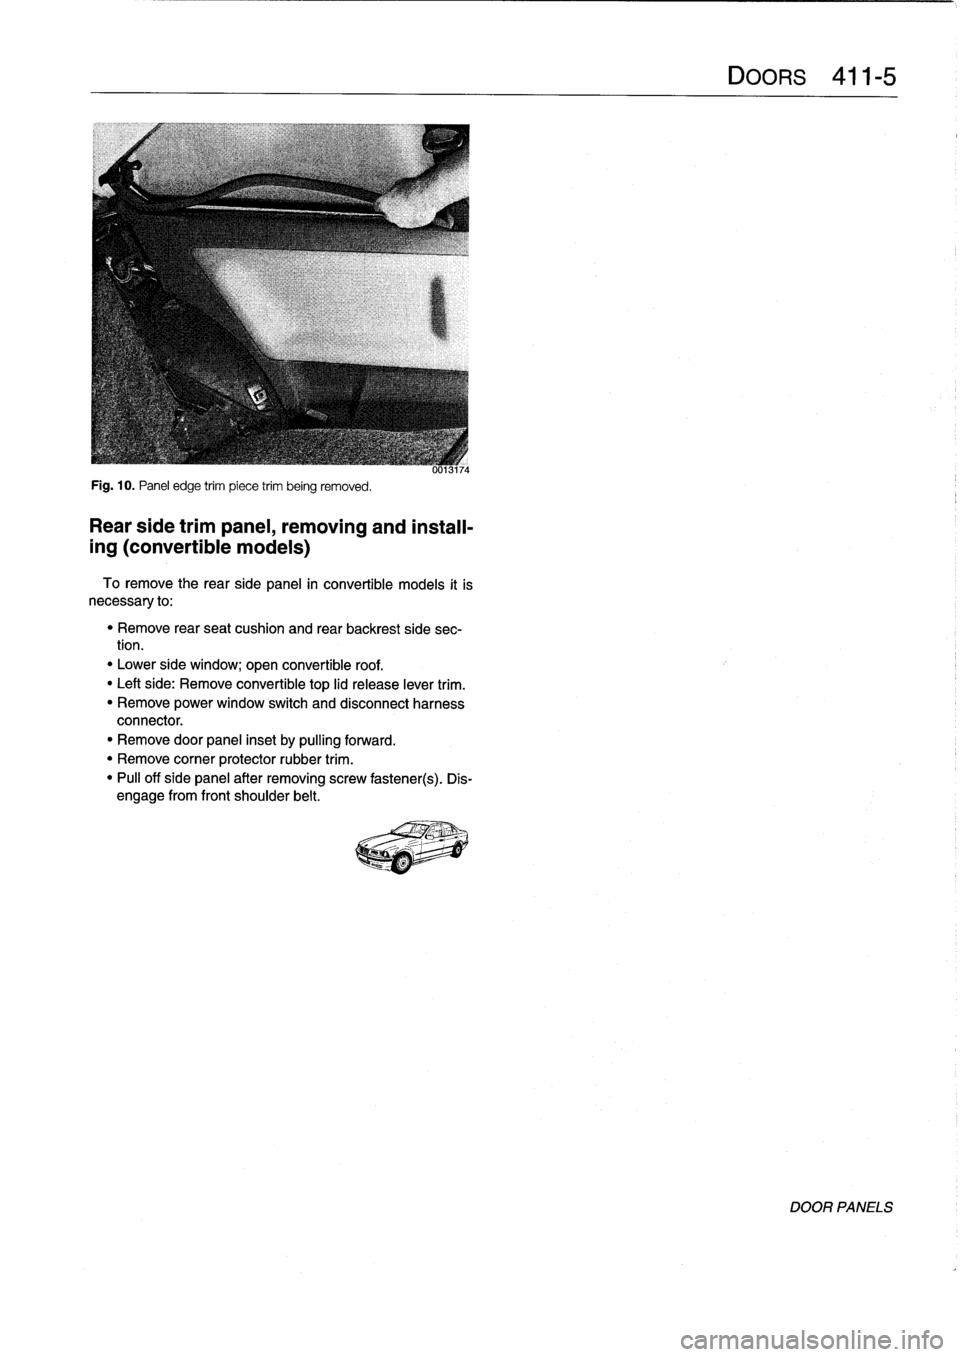 BMW M3 1996 E36 Workshop Manual 
Fig
.
10
.
Panel
edge
trim
piece
trim
being
removed
.

Rear
side
trimpanel,
removing
and
install-

ing
(convertible
models)

To
remove
the
rearside
panel
in
convertible
models
it
is
necessary
to
:

"